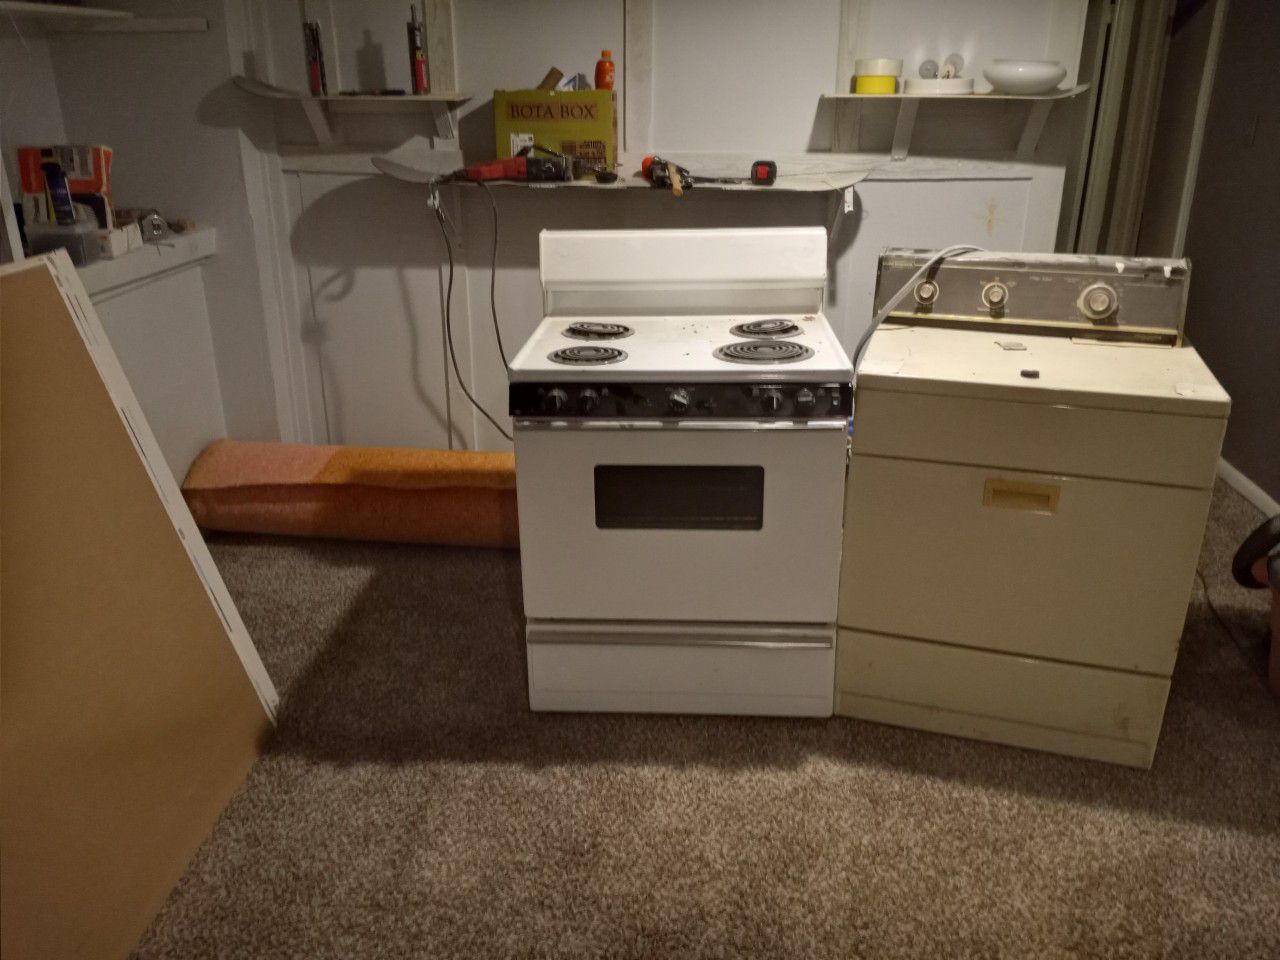 Free working stove and dryer